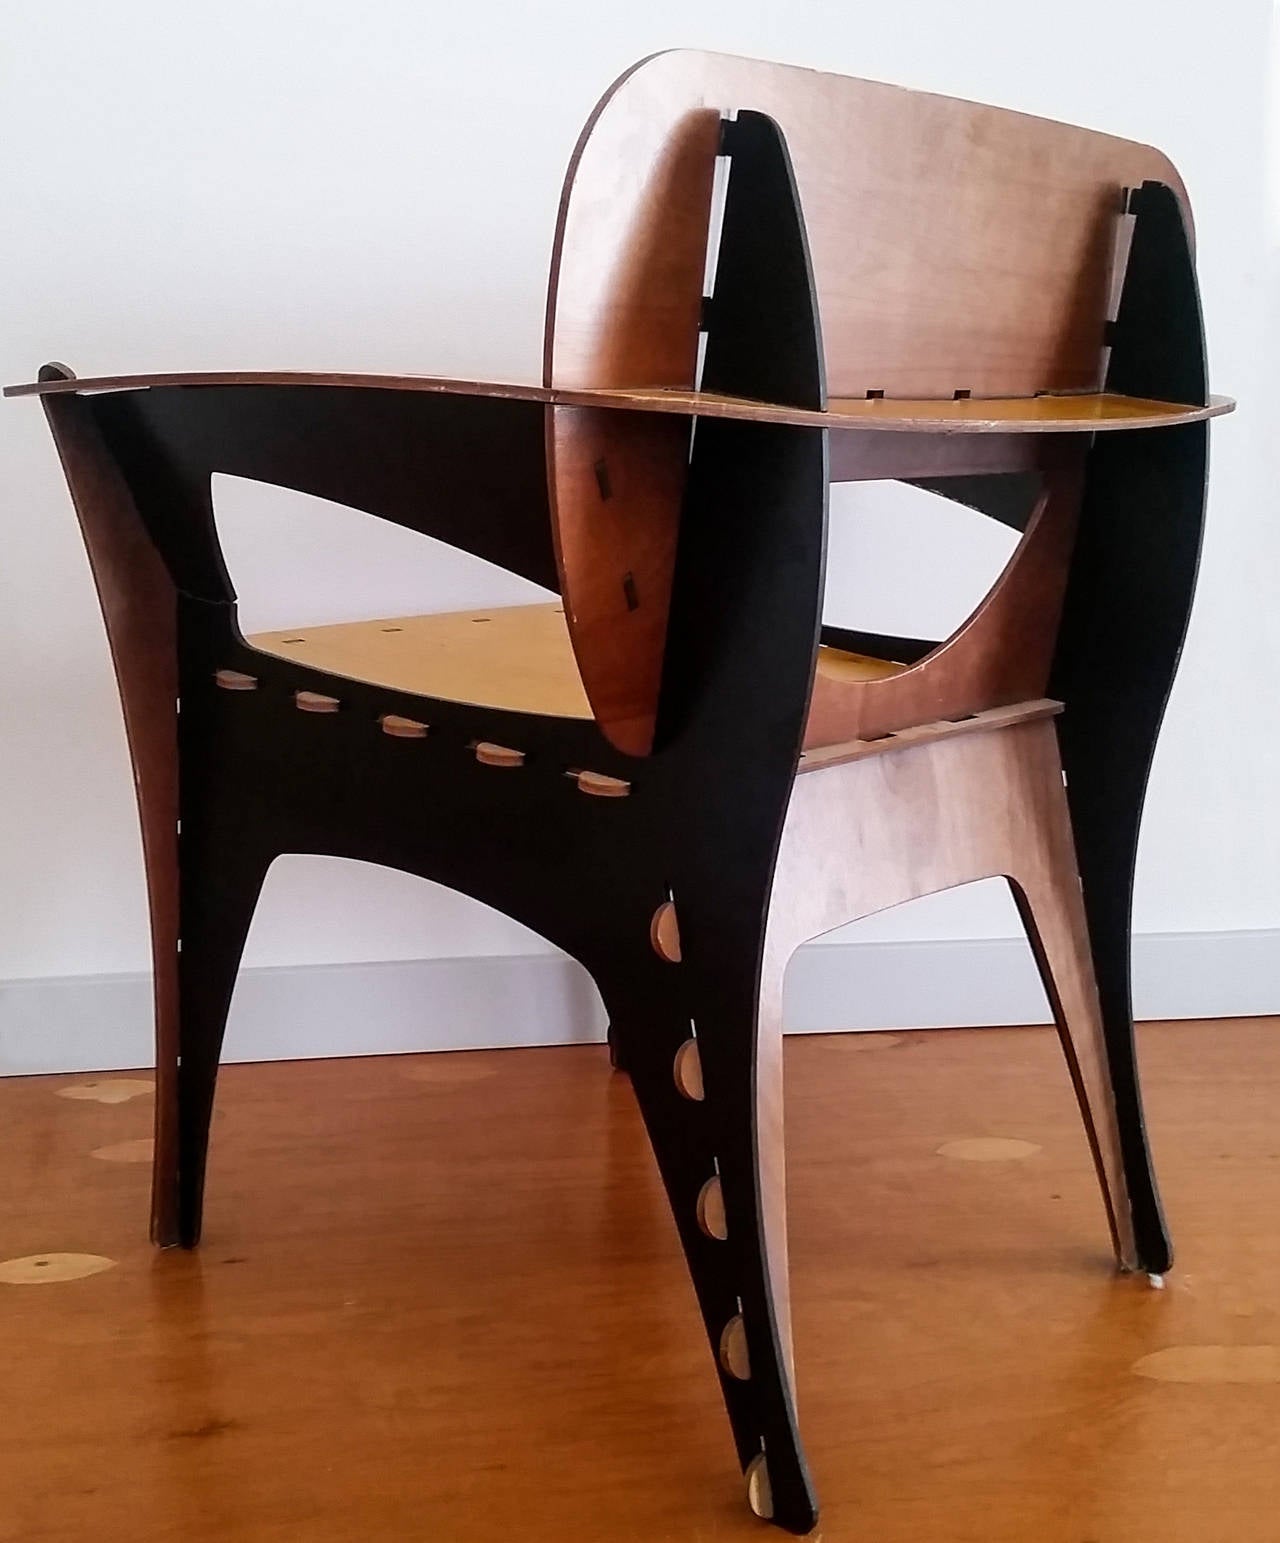 A stunning modern chair designed by David Kawecki, this plywood chair is a comfortable sitting chair as well as a conversation piece. The chair is  glossy birch colored plywood, walnut stained plywood, and ebonized (black painted) plywood.

This